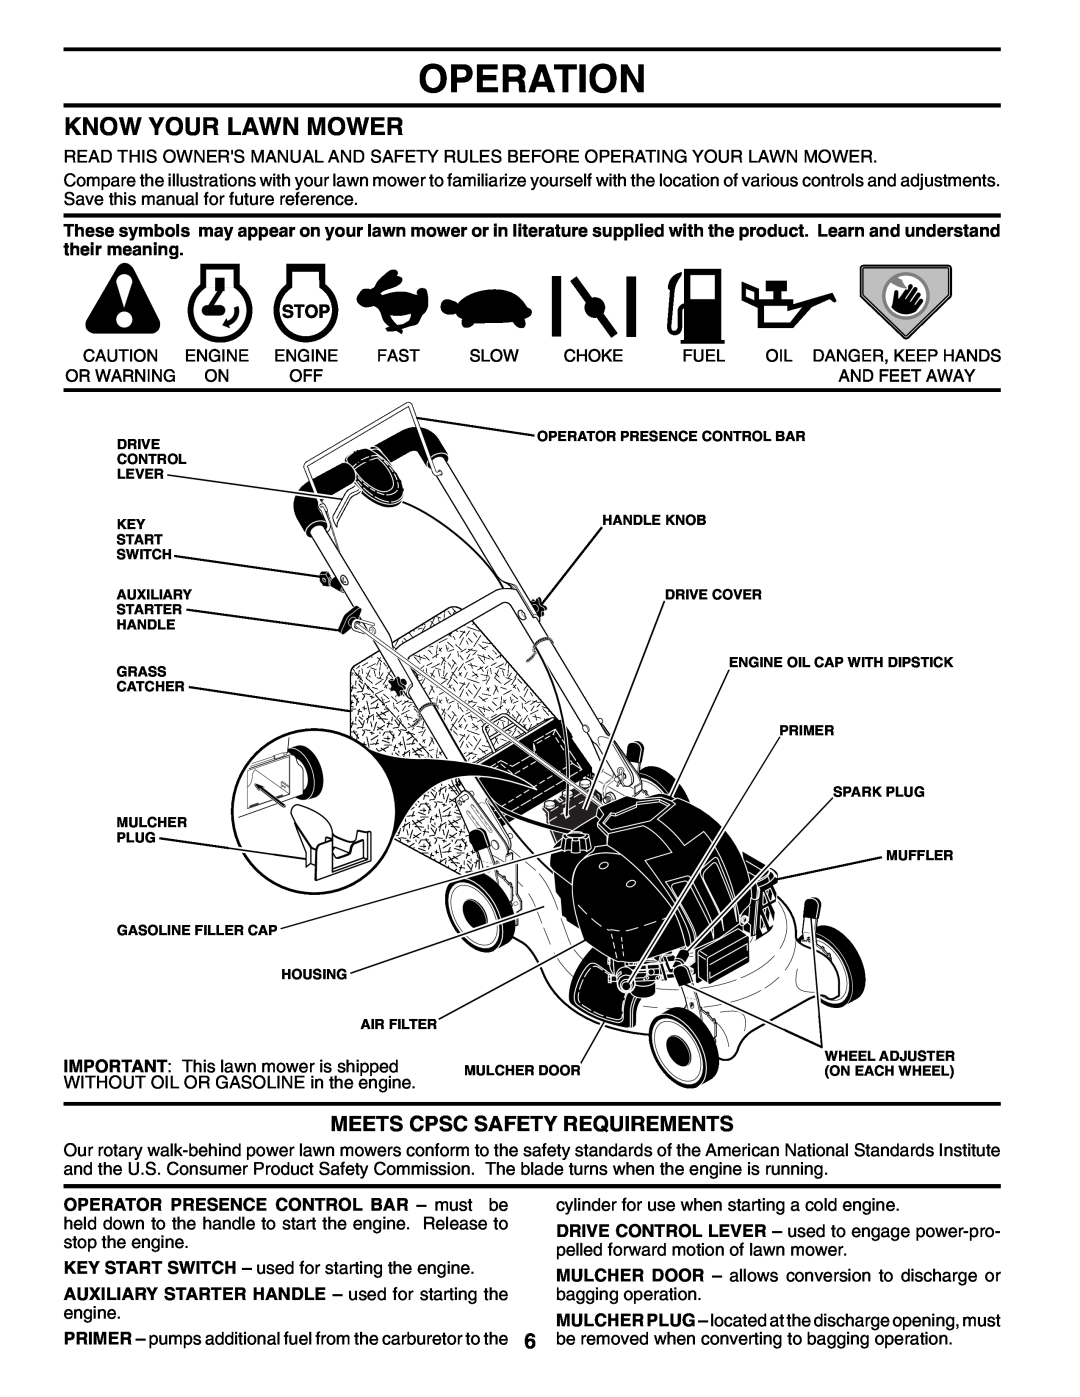 Husqvarna 7021RES Operation, Know Your Lawn Mower, Meets Cpsc Safety Requirements, OPERATOR PRESENCE CONTROL BAR - must be 